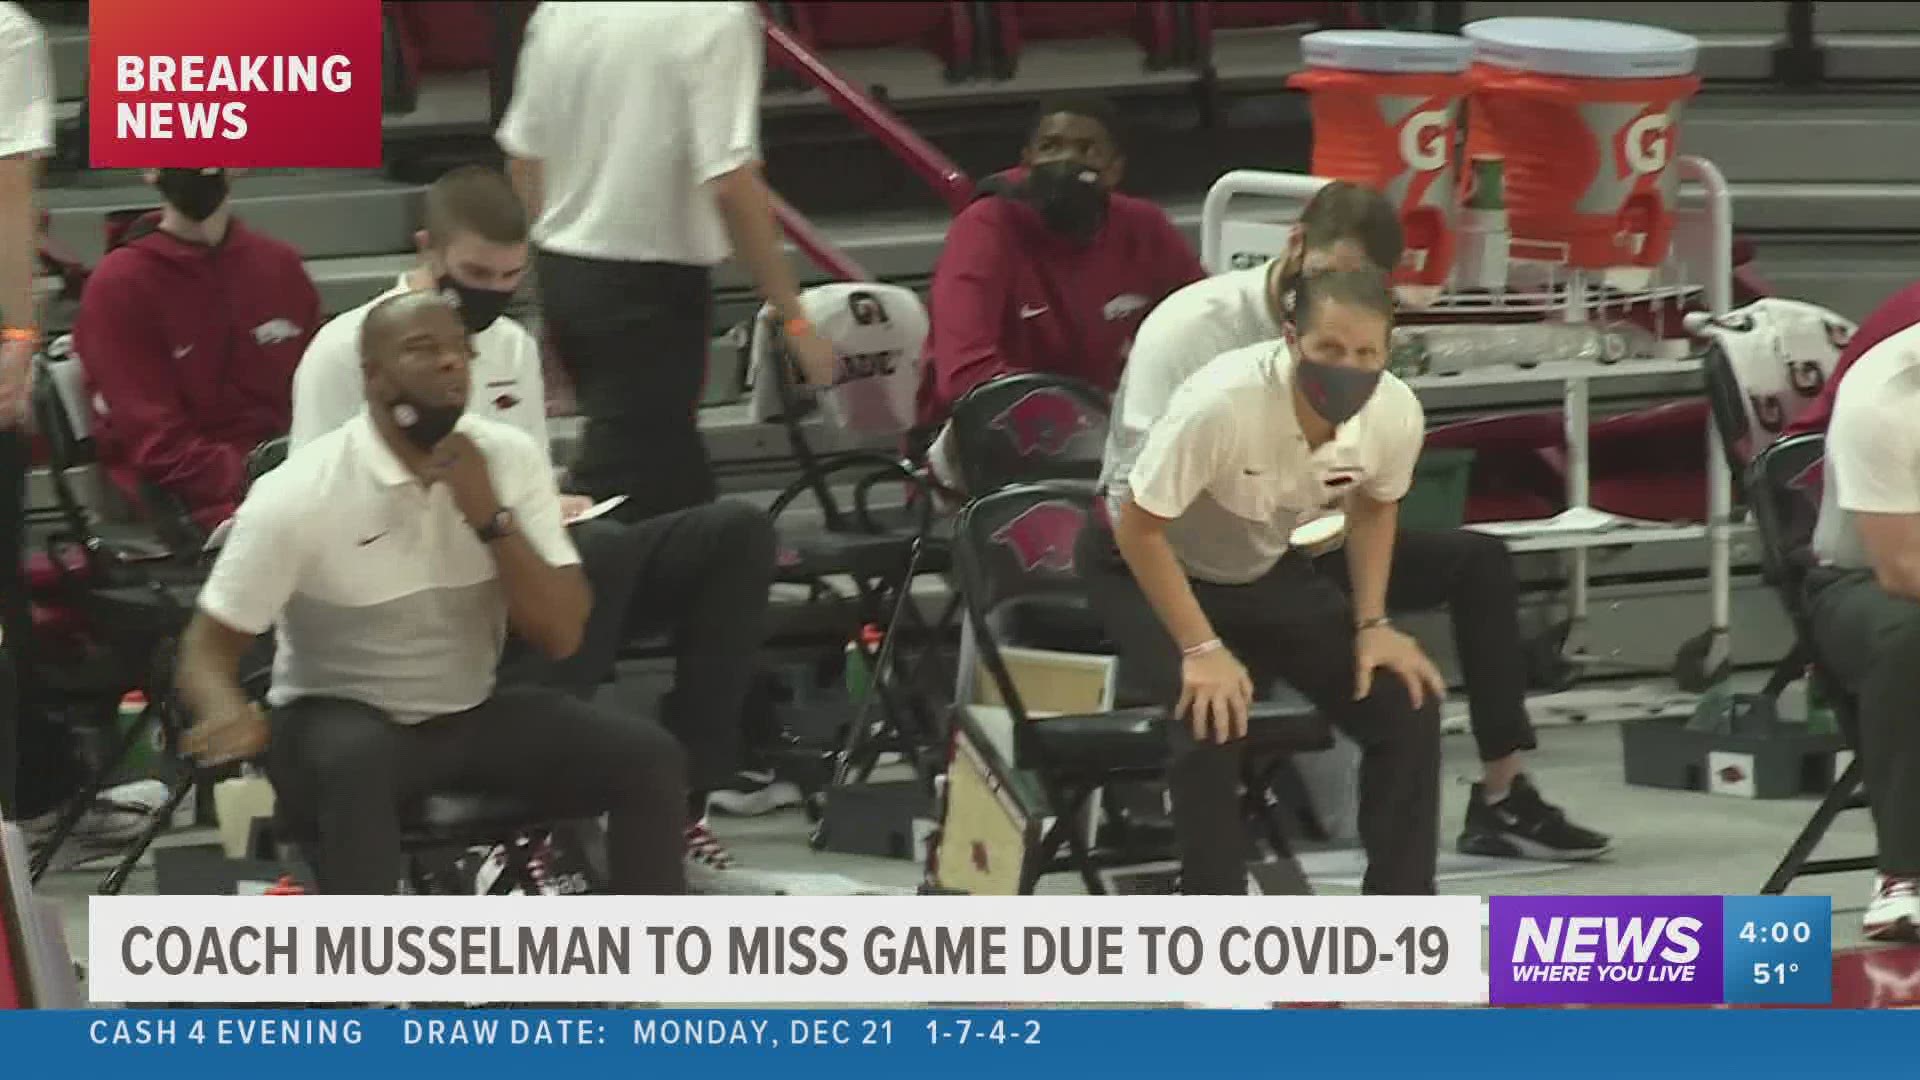 Coach Musselman to miss game due to COVID-19 protocols